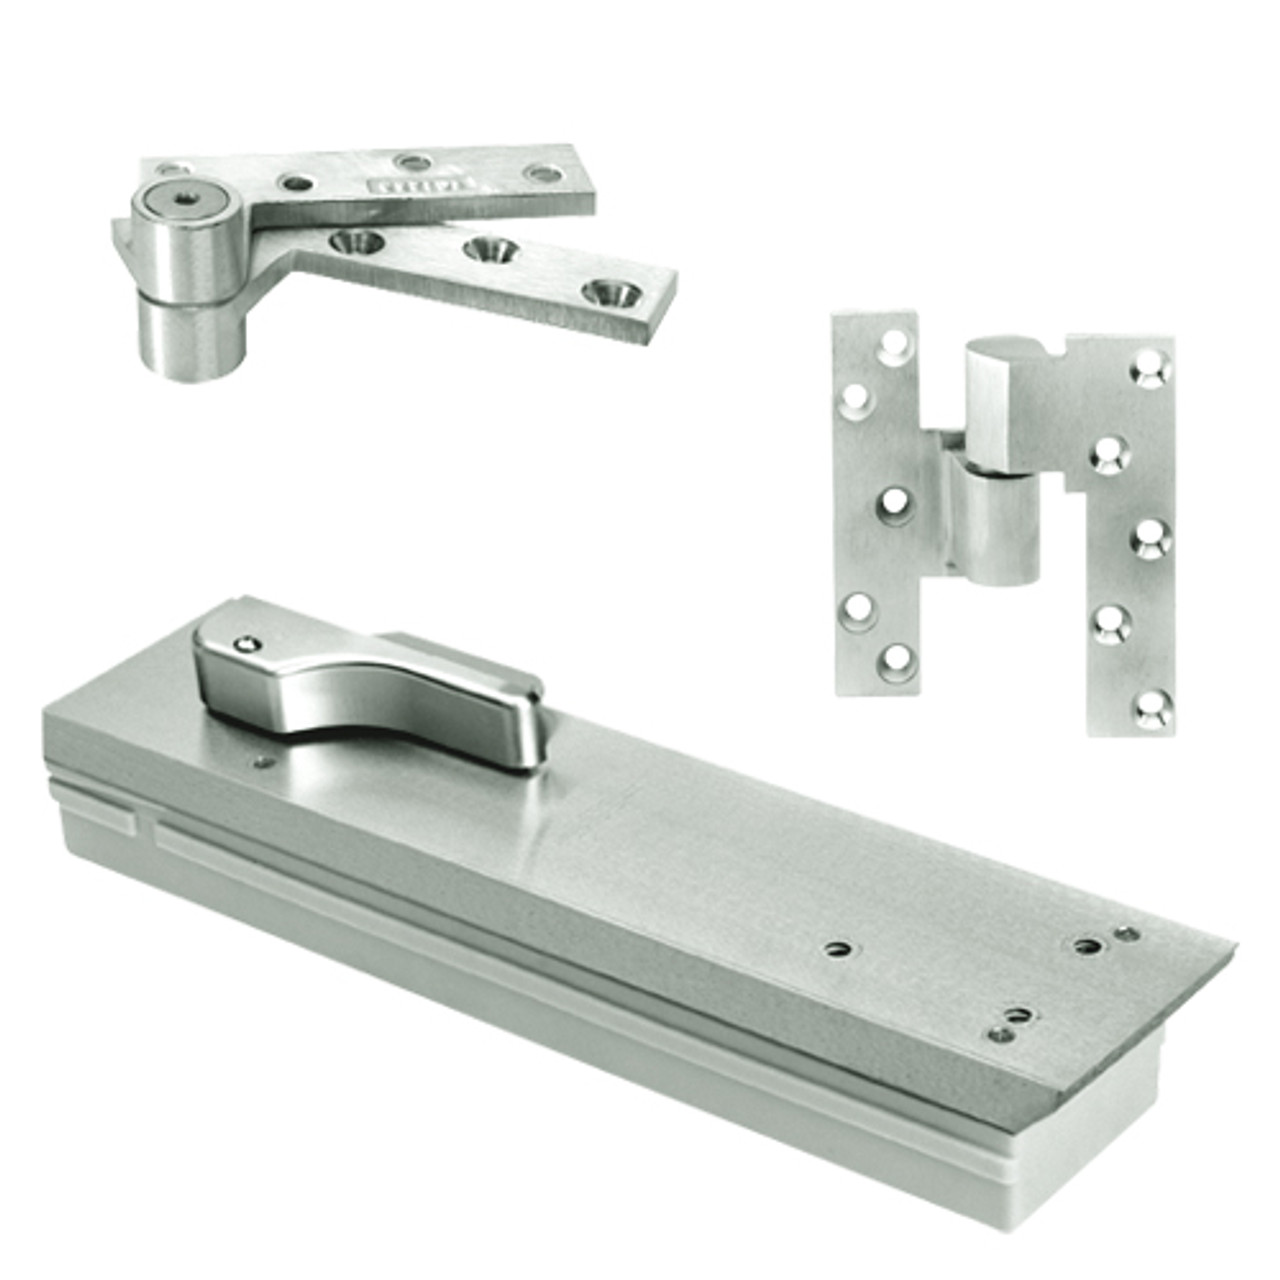 Q5104ABC105-LH-618 Rixson Q51 Series 3/4" Offset Hung Shallow Depth Floor Closers in Bright Nickel Finish